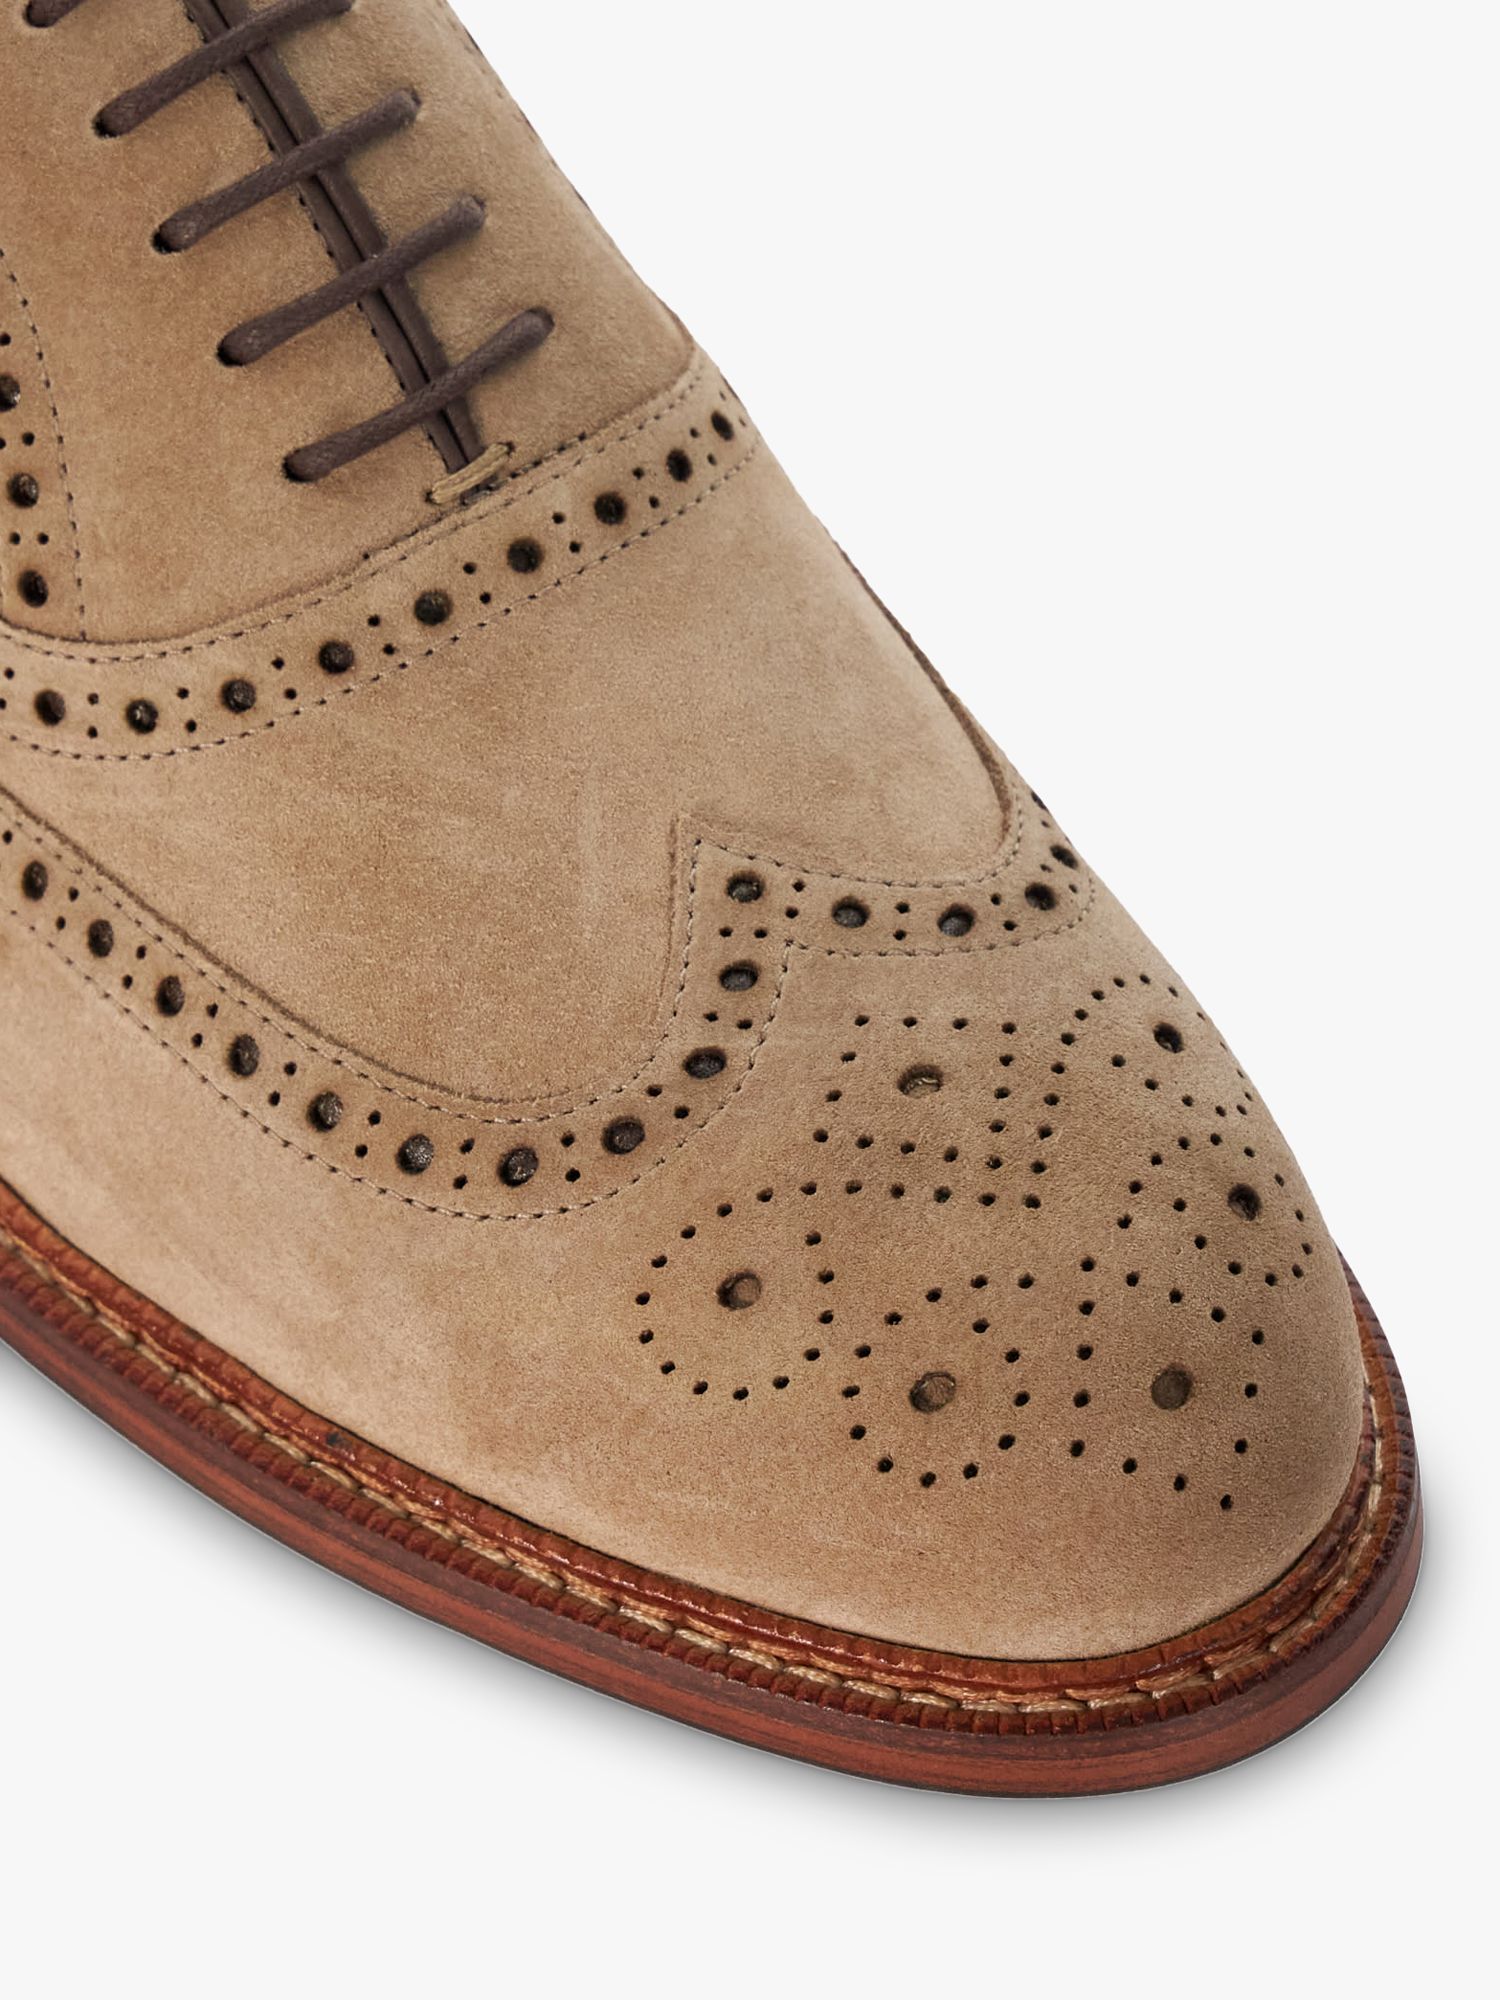 Dune Solihull Suede Oxford Brogue Shoes, Taupe, 6